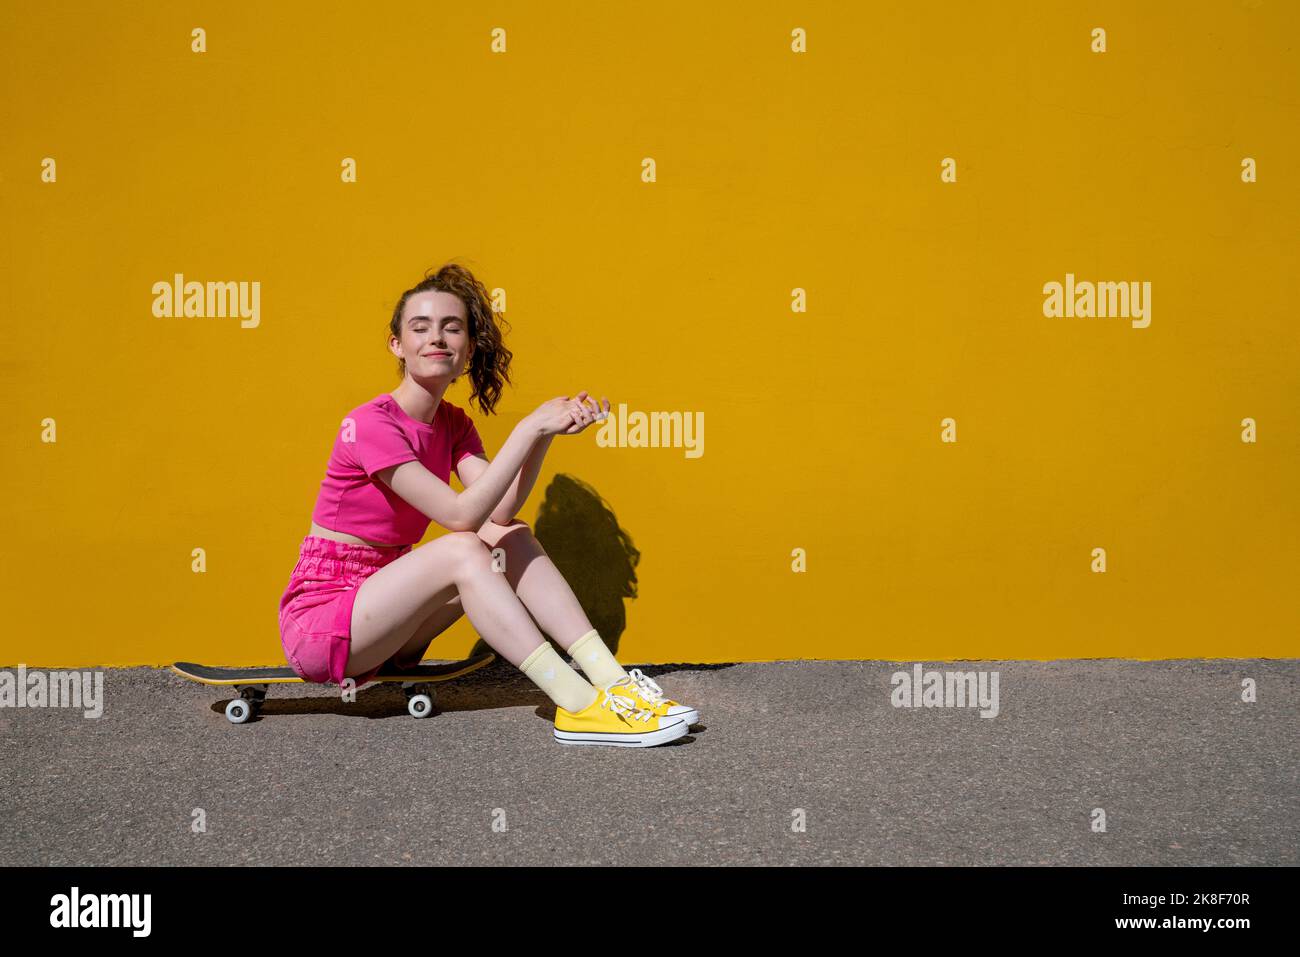 Smiling woman with eyes closed sitting on skateboard in front of yellow wall Stock Photo